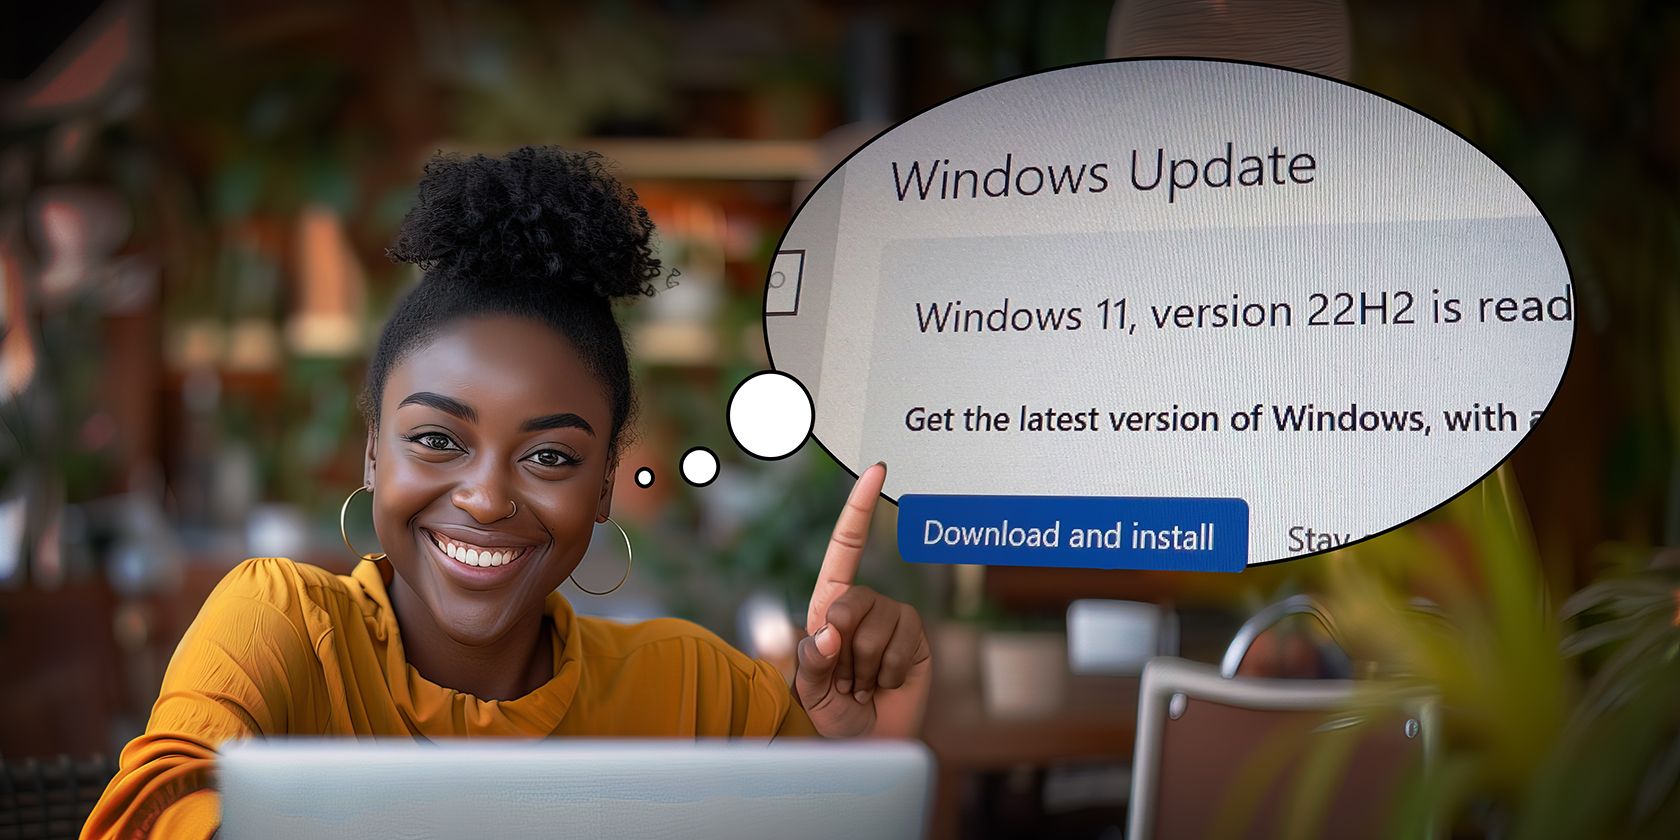 A cheerful woman points to a laptop screen displaying a prompt to download and install Windows 11